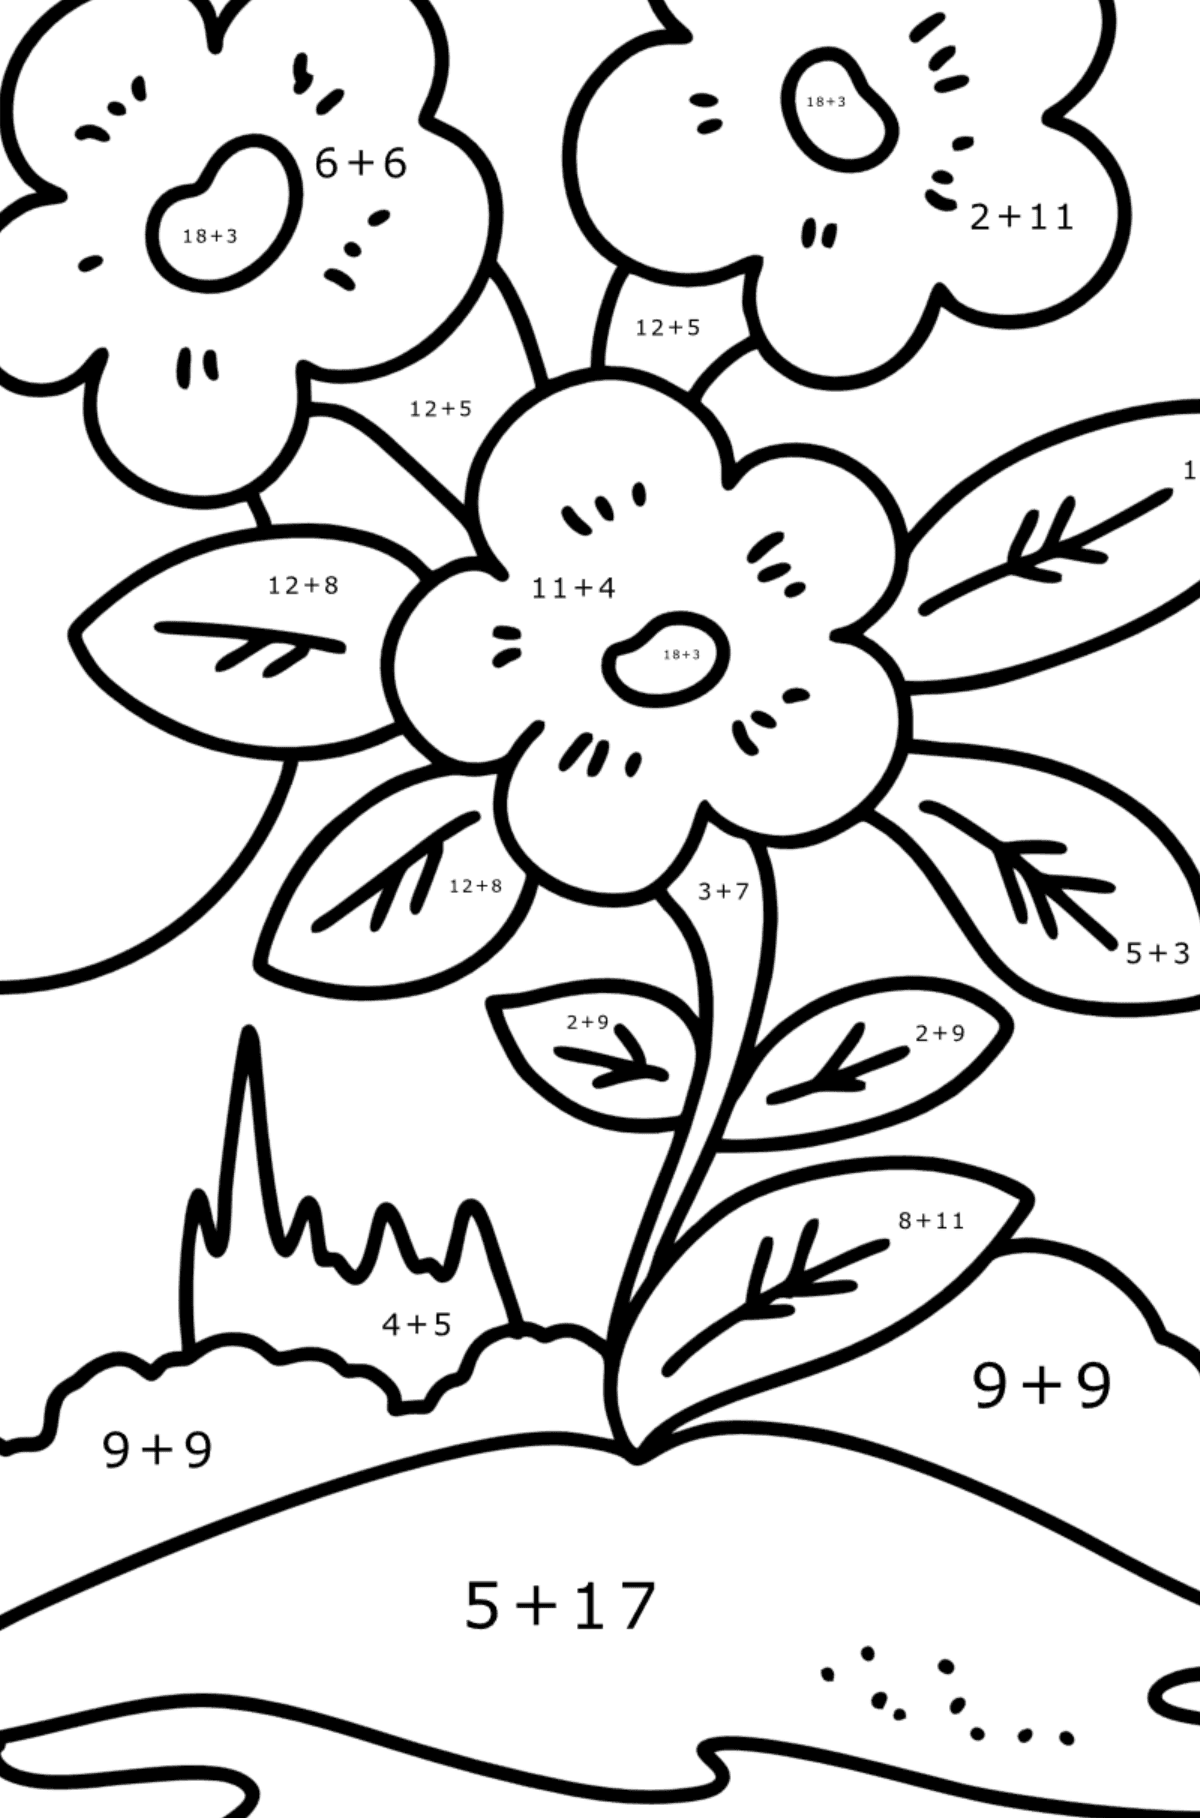 Spring flowers coloring page for Kids - Math Coloring - Addition for Kids